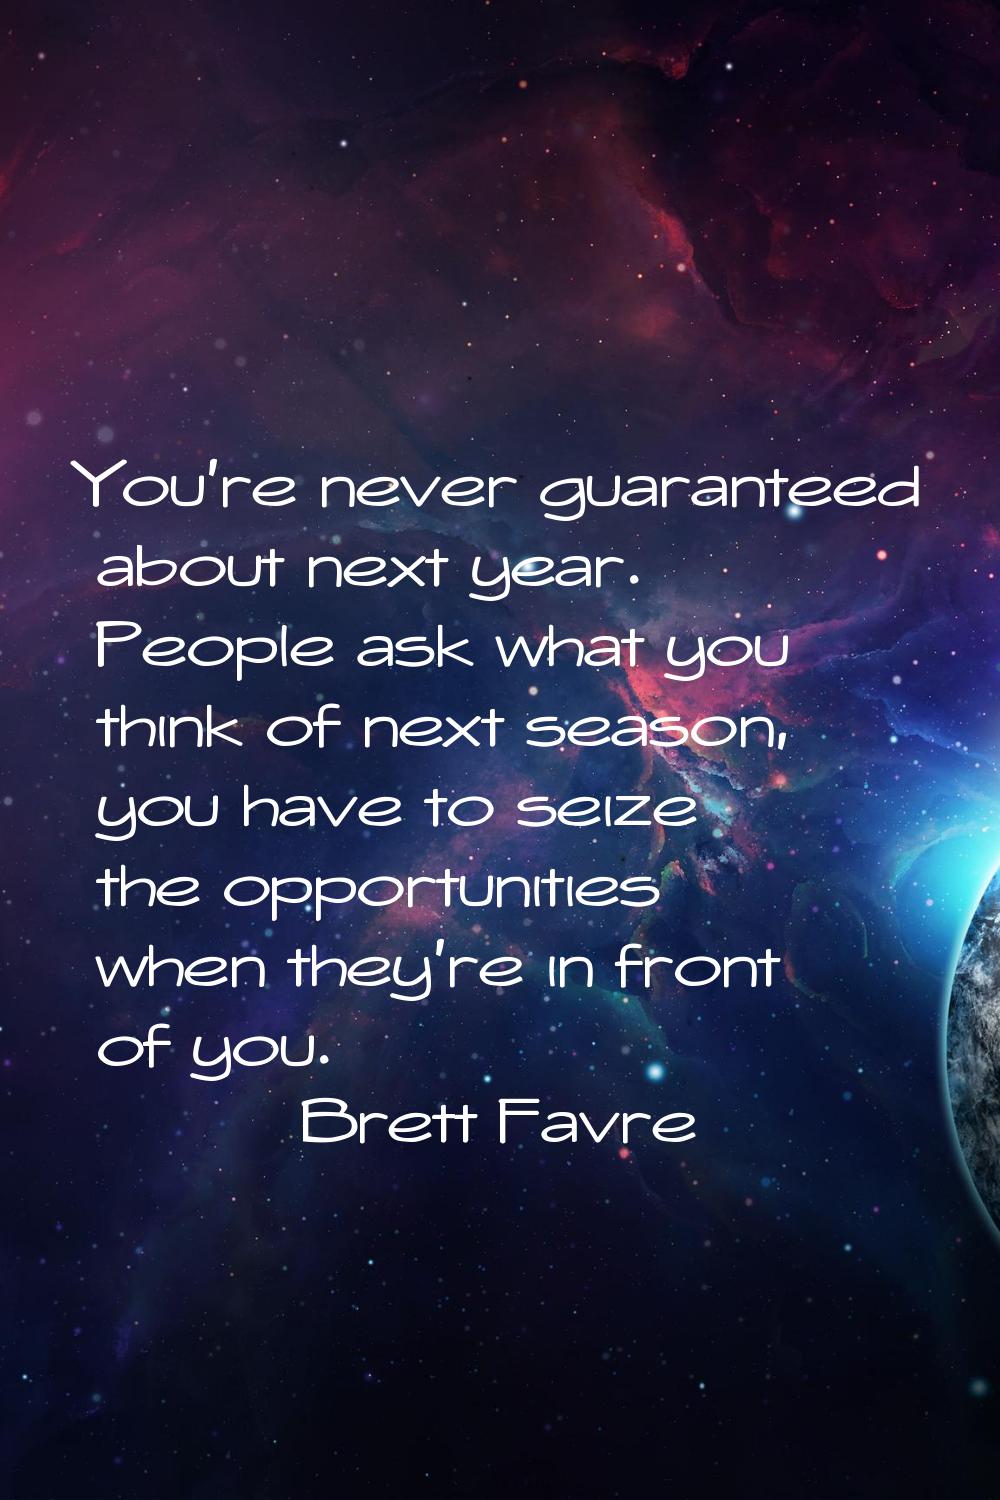 You're never guaranteed about next year. People ask what you think of next season, you have to seiz